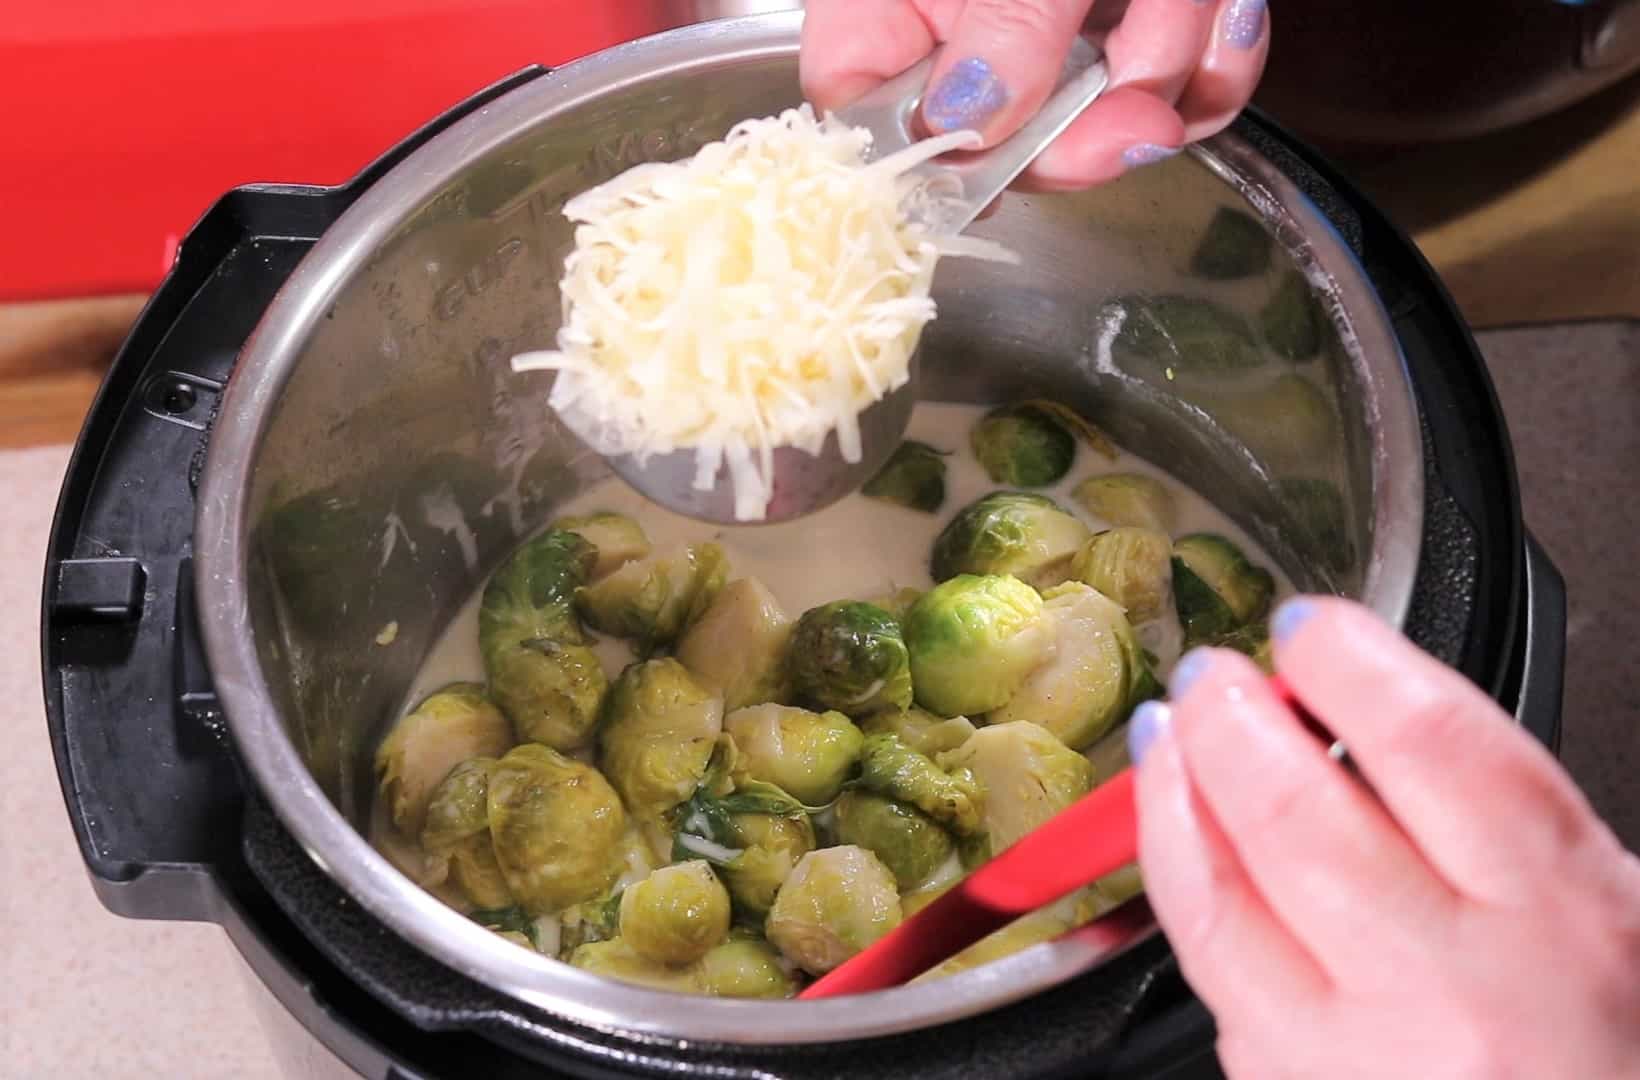 Slowly Mix in Parmesan Cheese